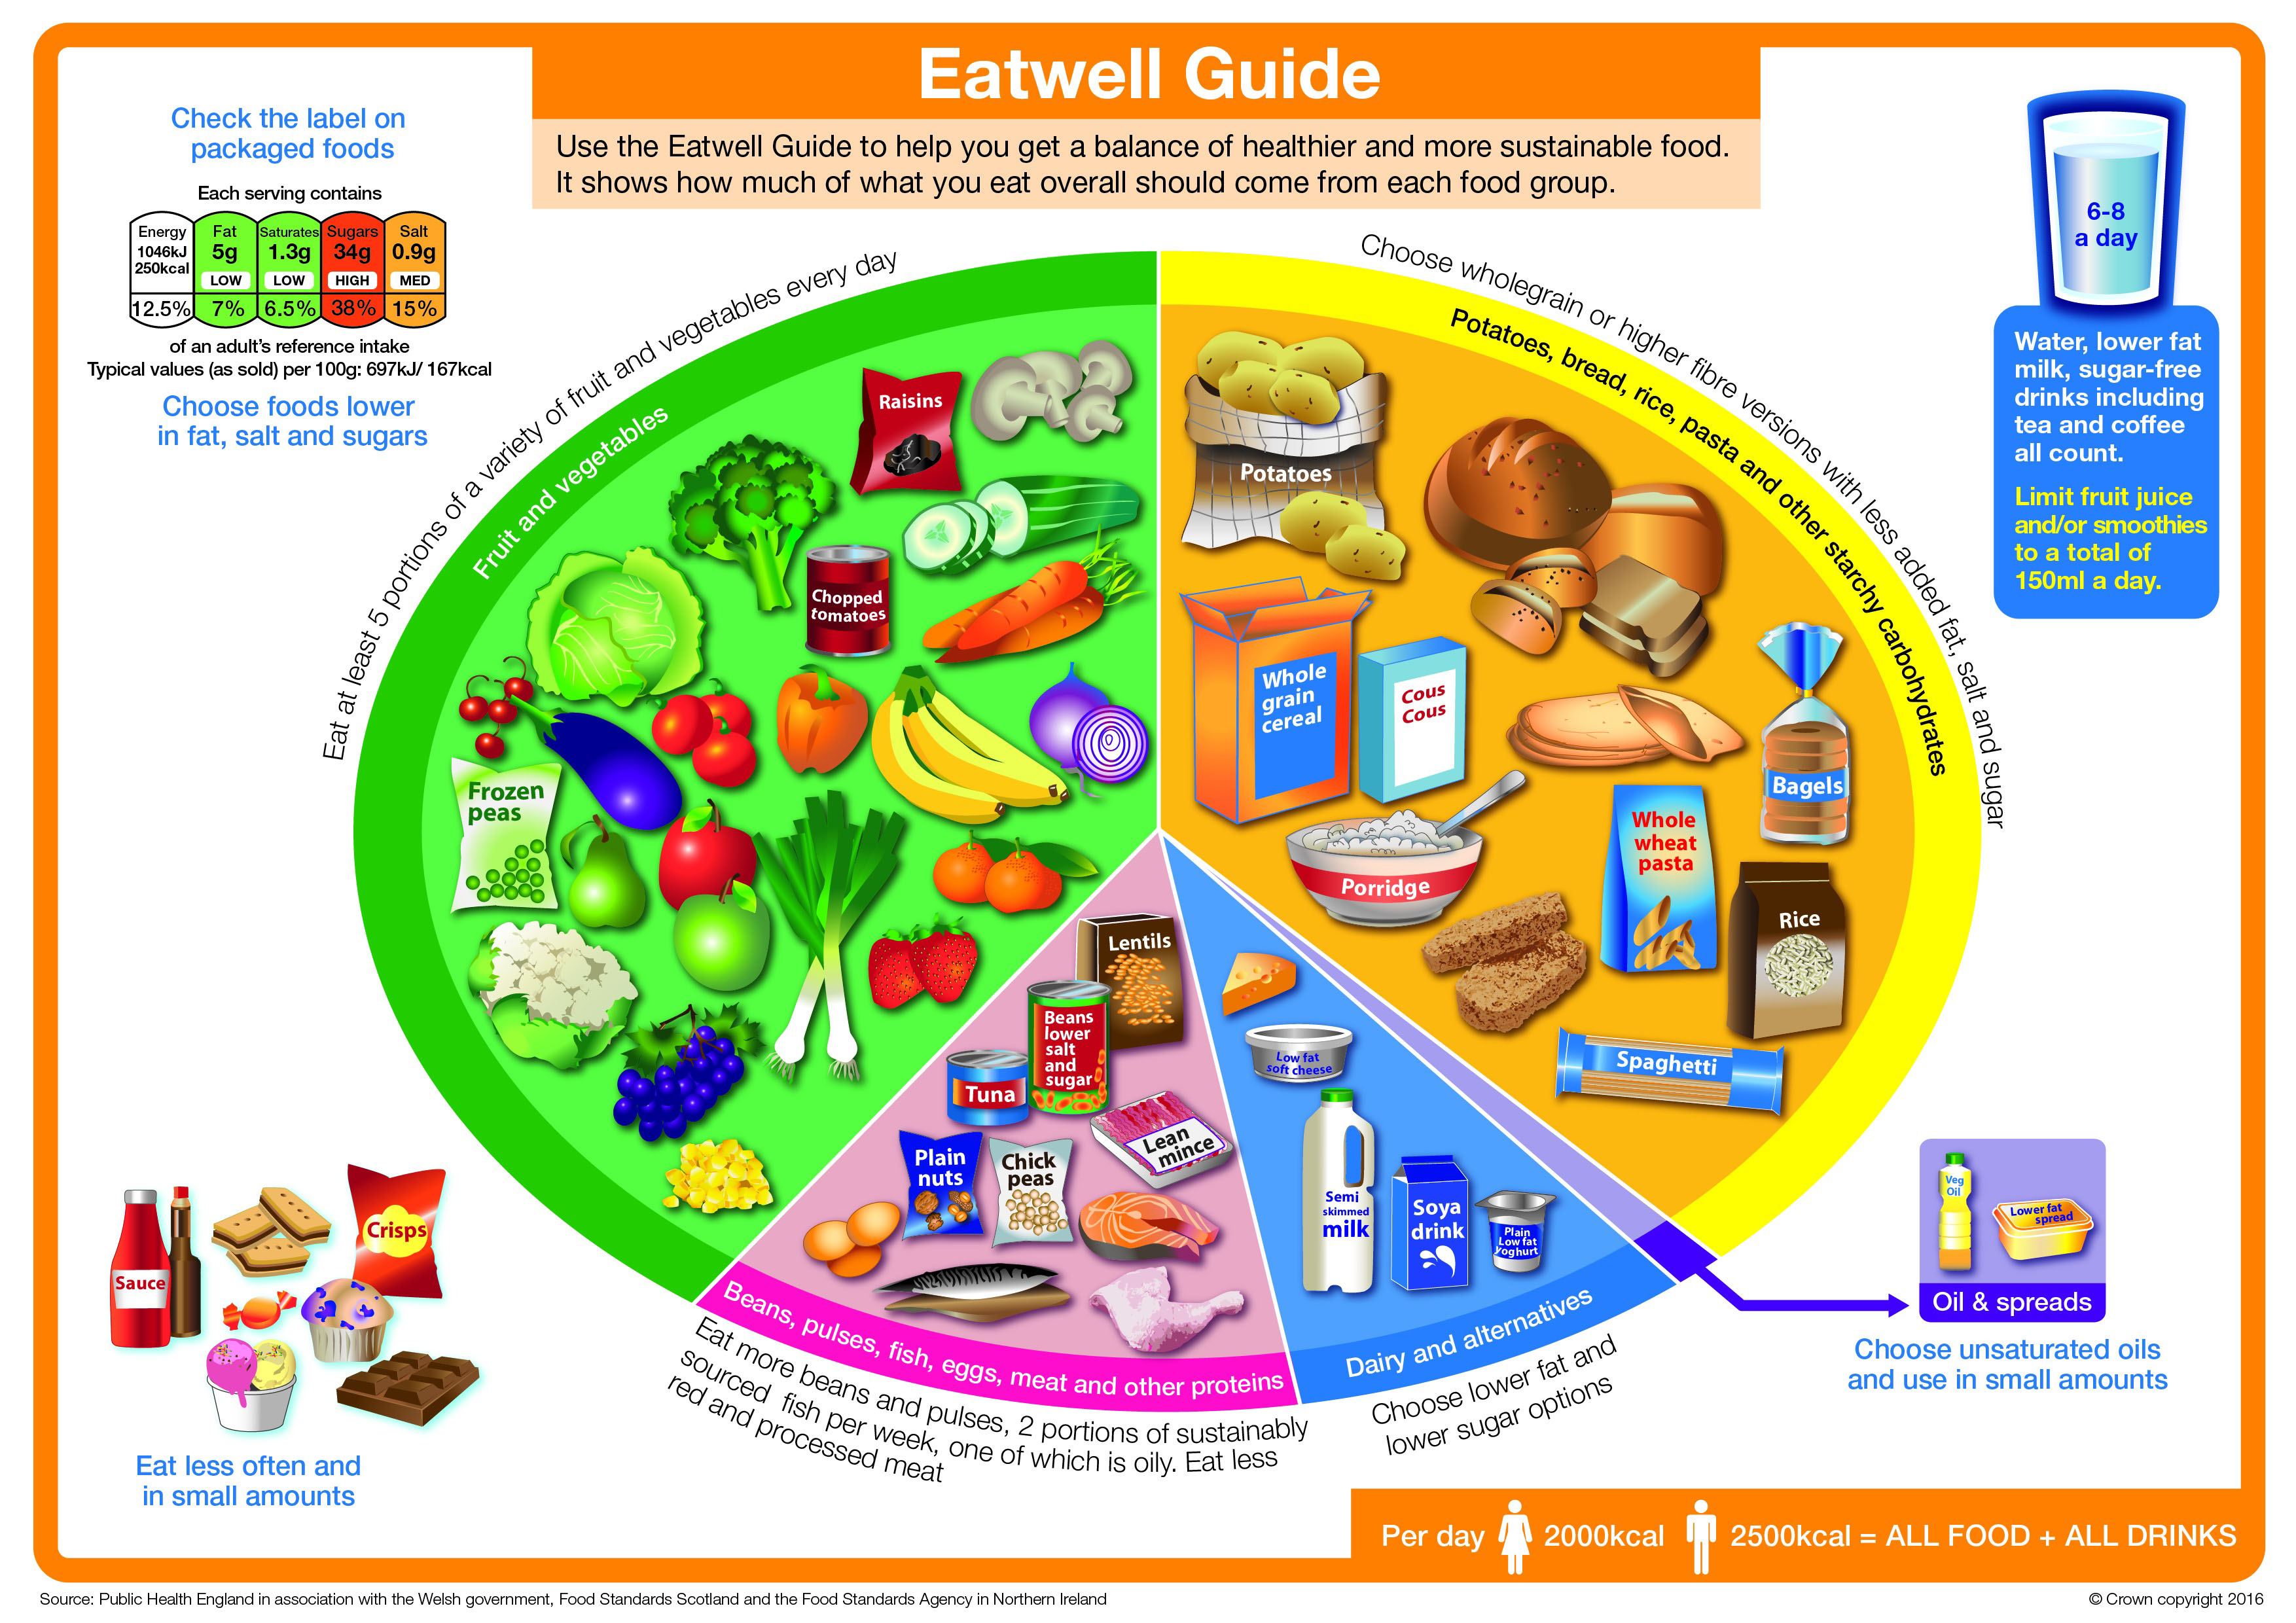 Eatwell guide to find foods of different types.